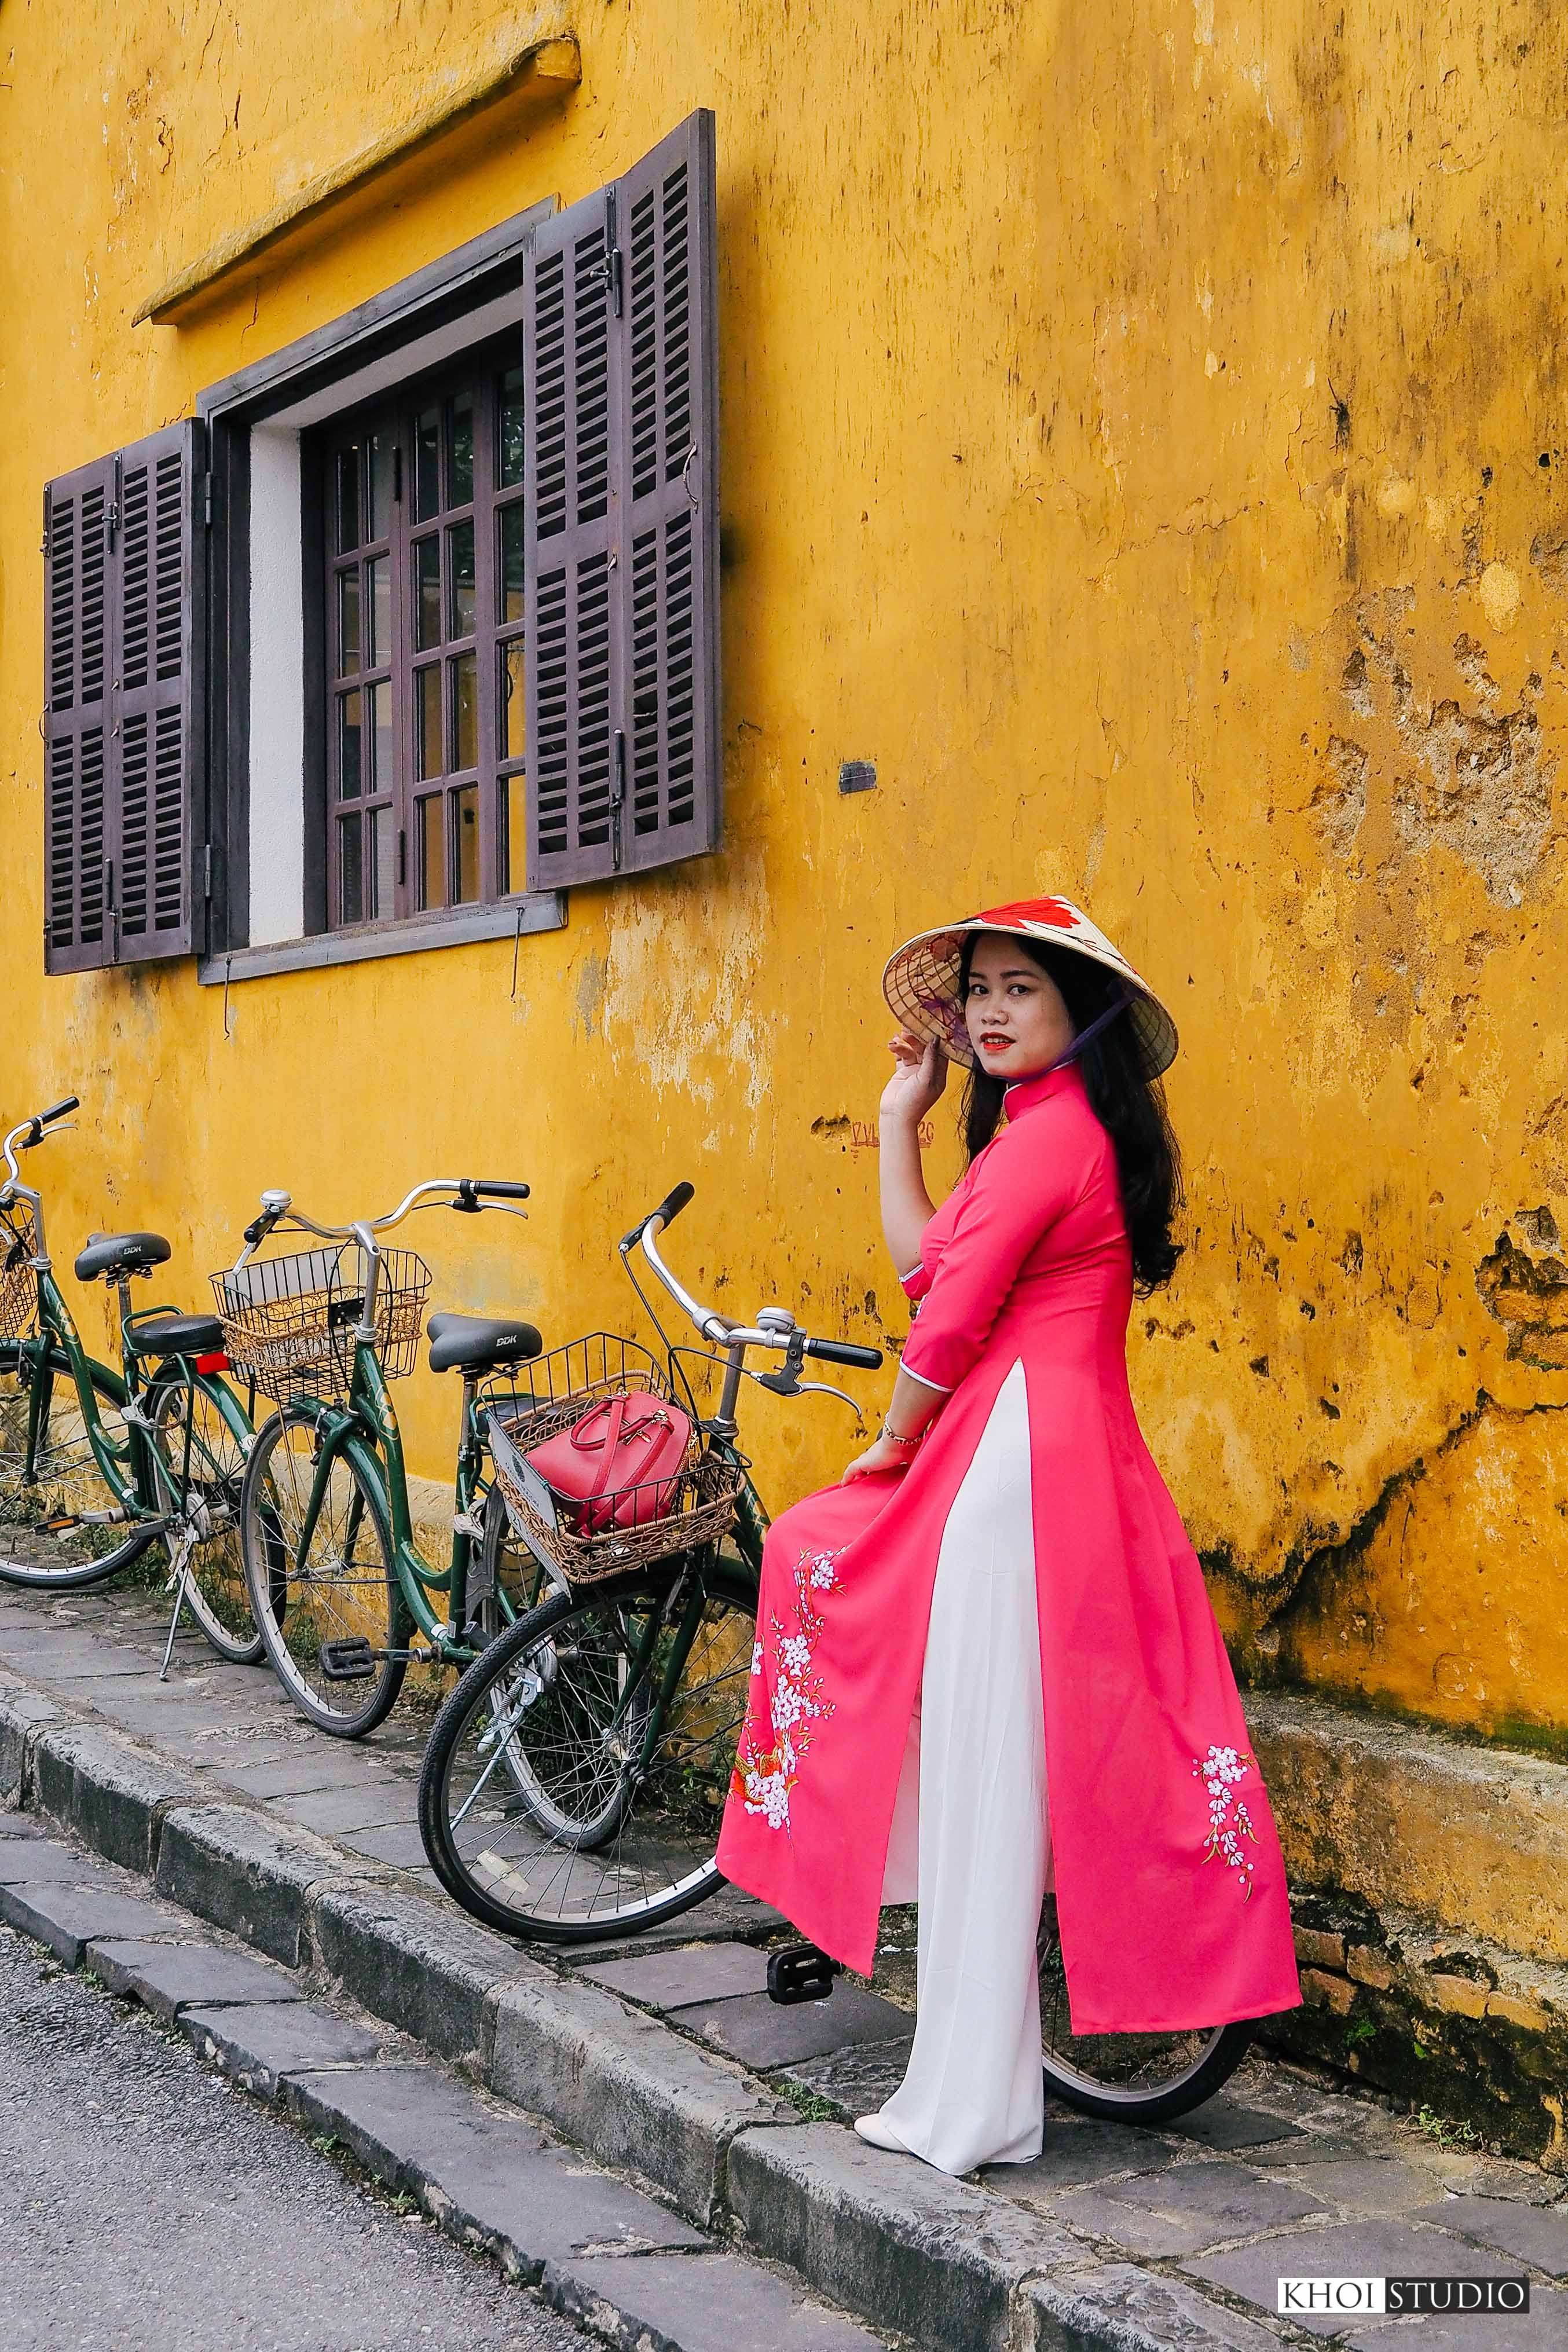 Tourist photography tour in Da Nang & Hoi An: Choosing a pink ao dai for a portrait session in Hoi An ancient town